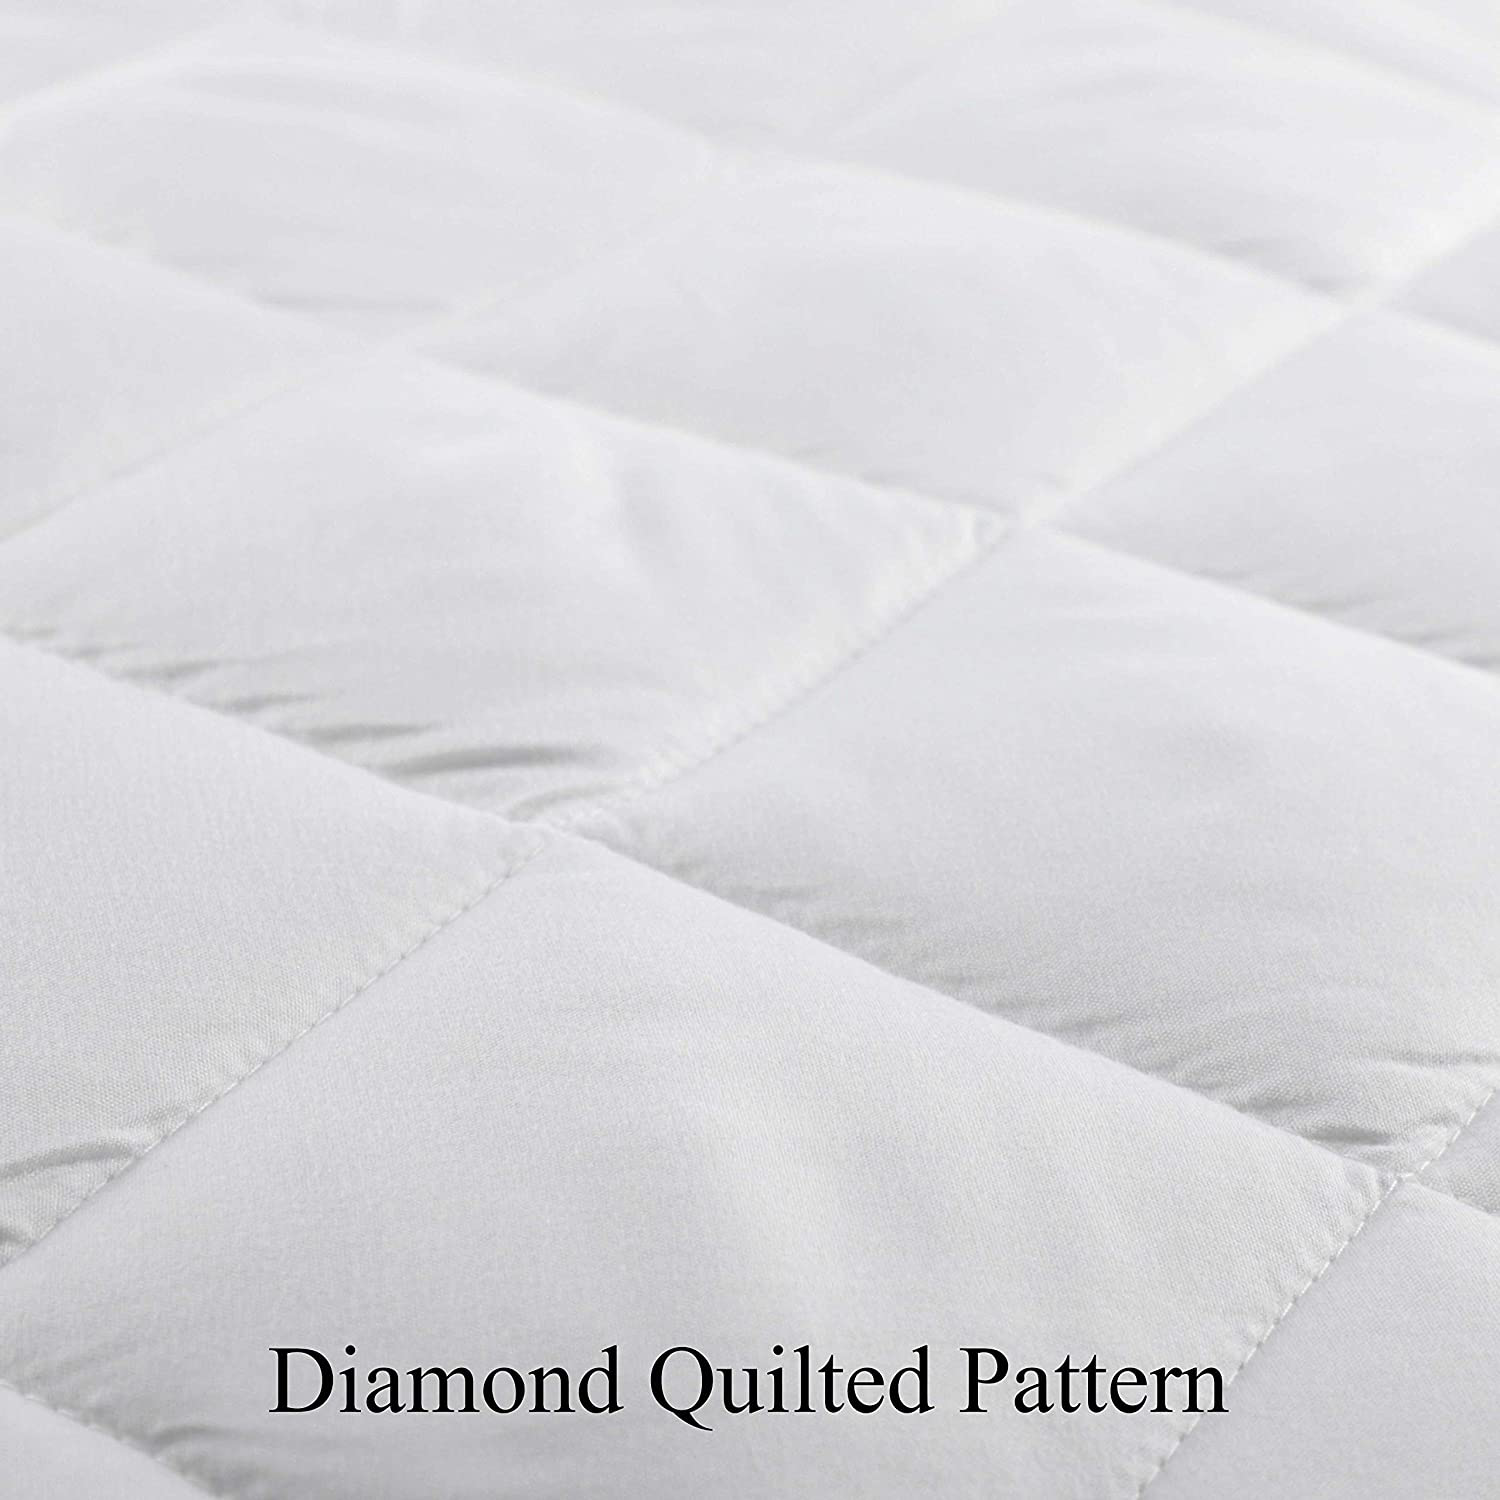 Mea Cama Quilted Mattress Topper Pad Fitted Cover - Fits 16 inch Deep Mattress (Twin XL)